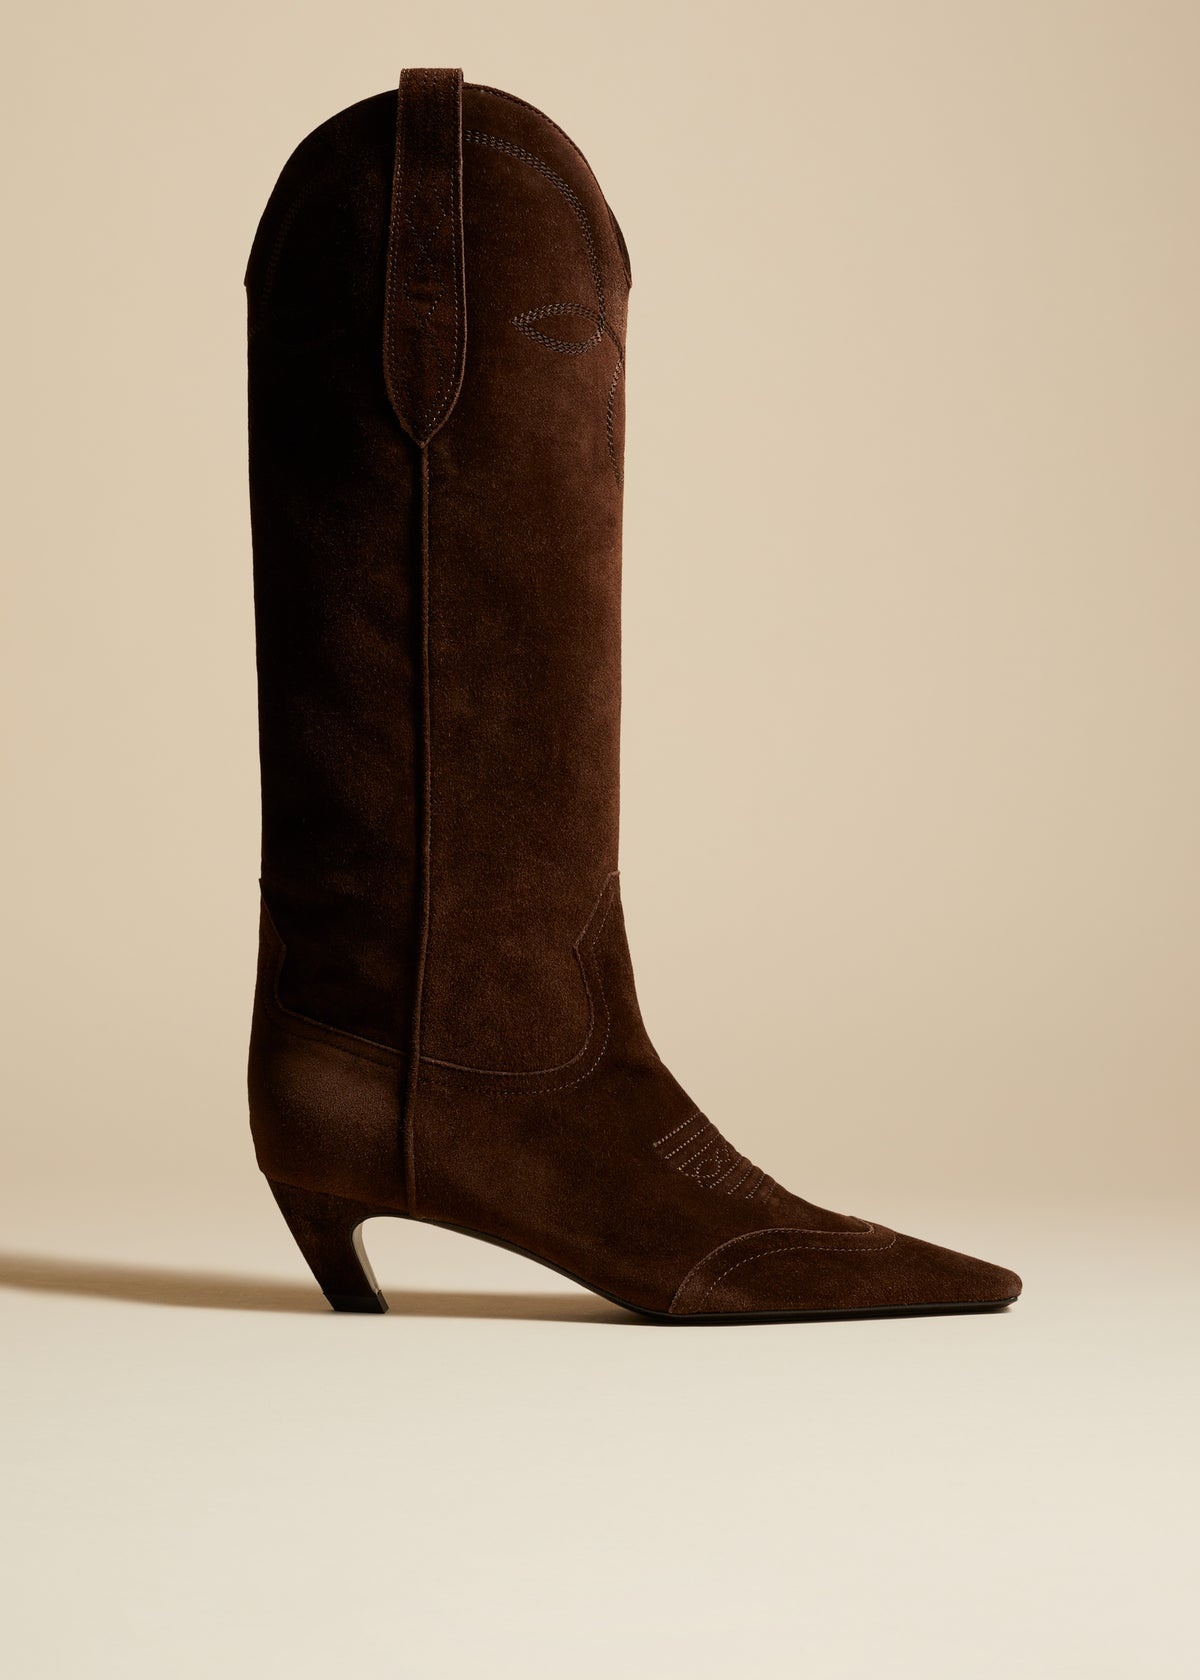 The Dallas Knee High Boot in Coffee Suede - 1